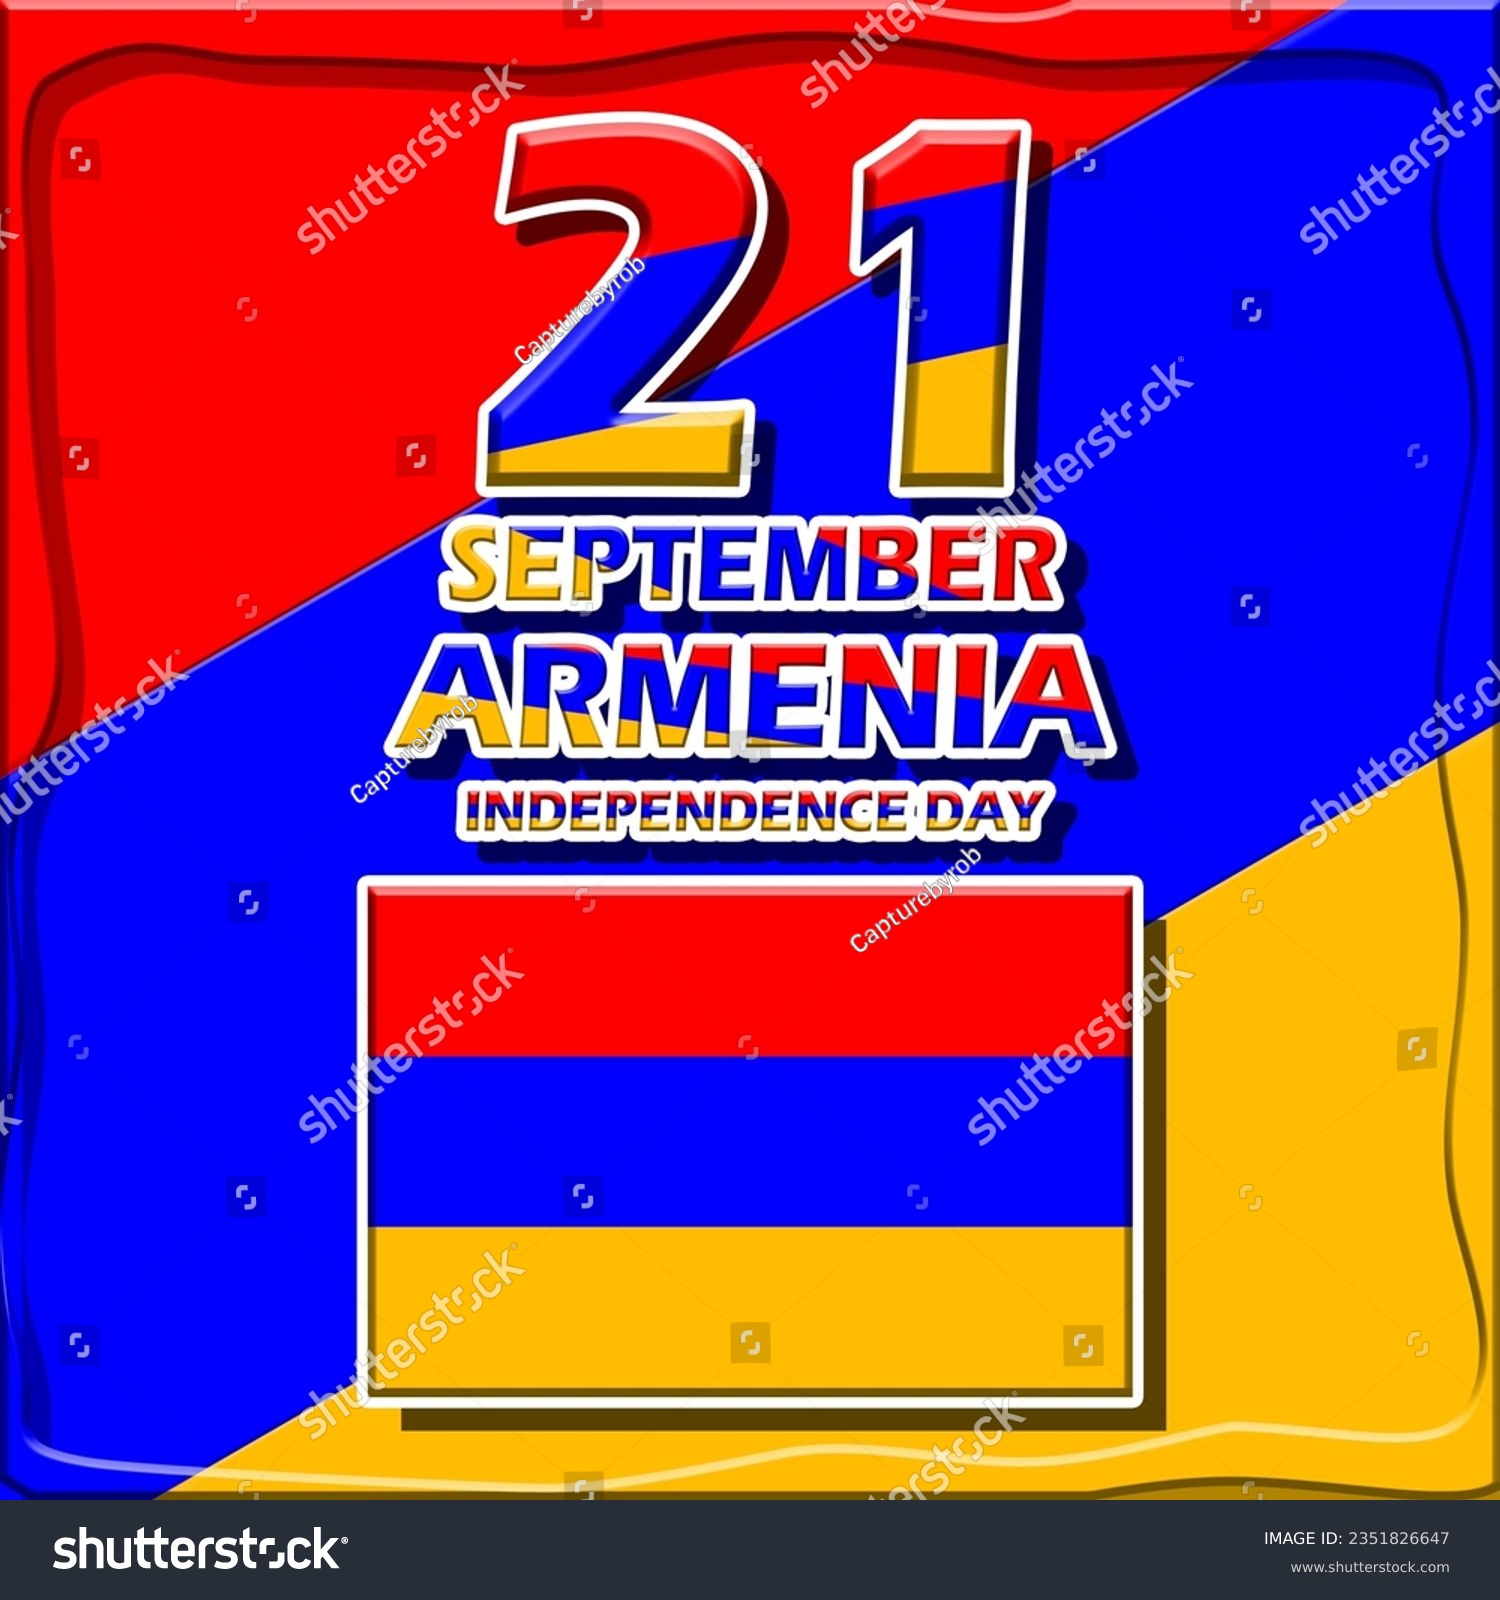 SVG of Armenian flag with big number and bold text in frame
to commemorate Armenia Independence Day on September 21 svg